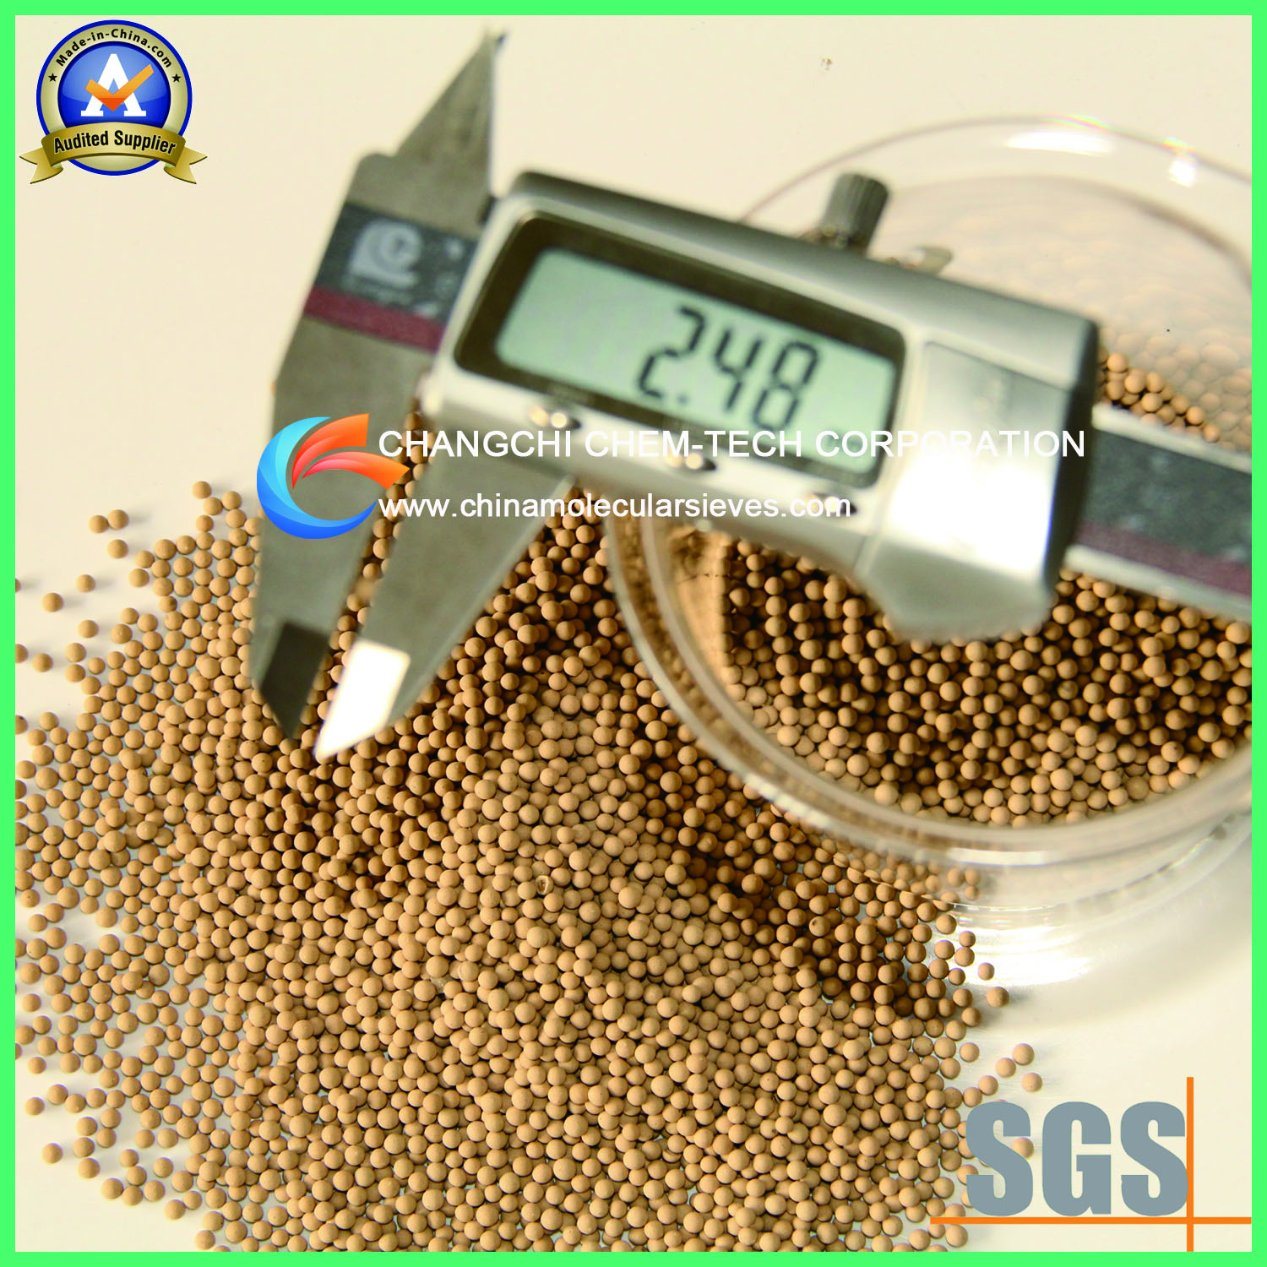 3A Insulating Glass Molecular Sieves as Desiccant